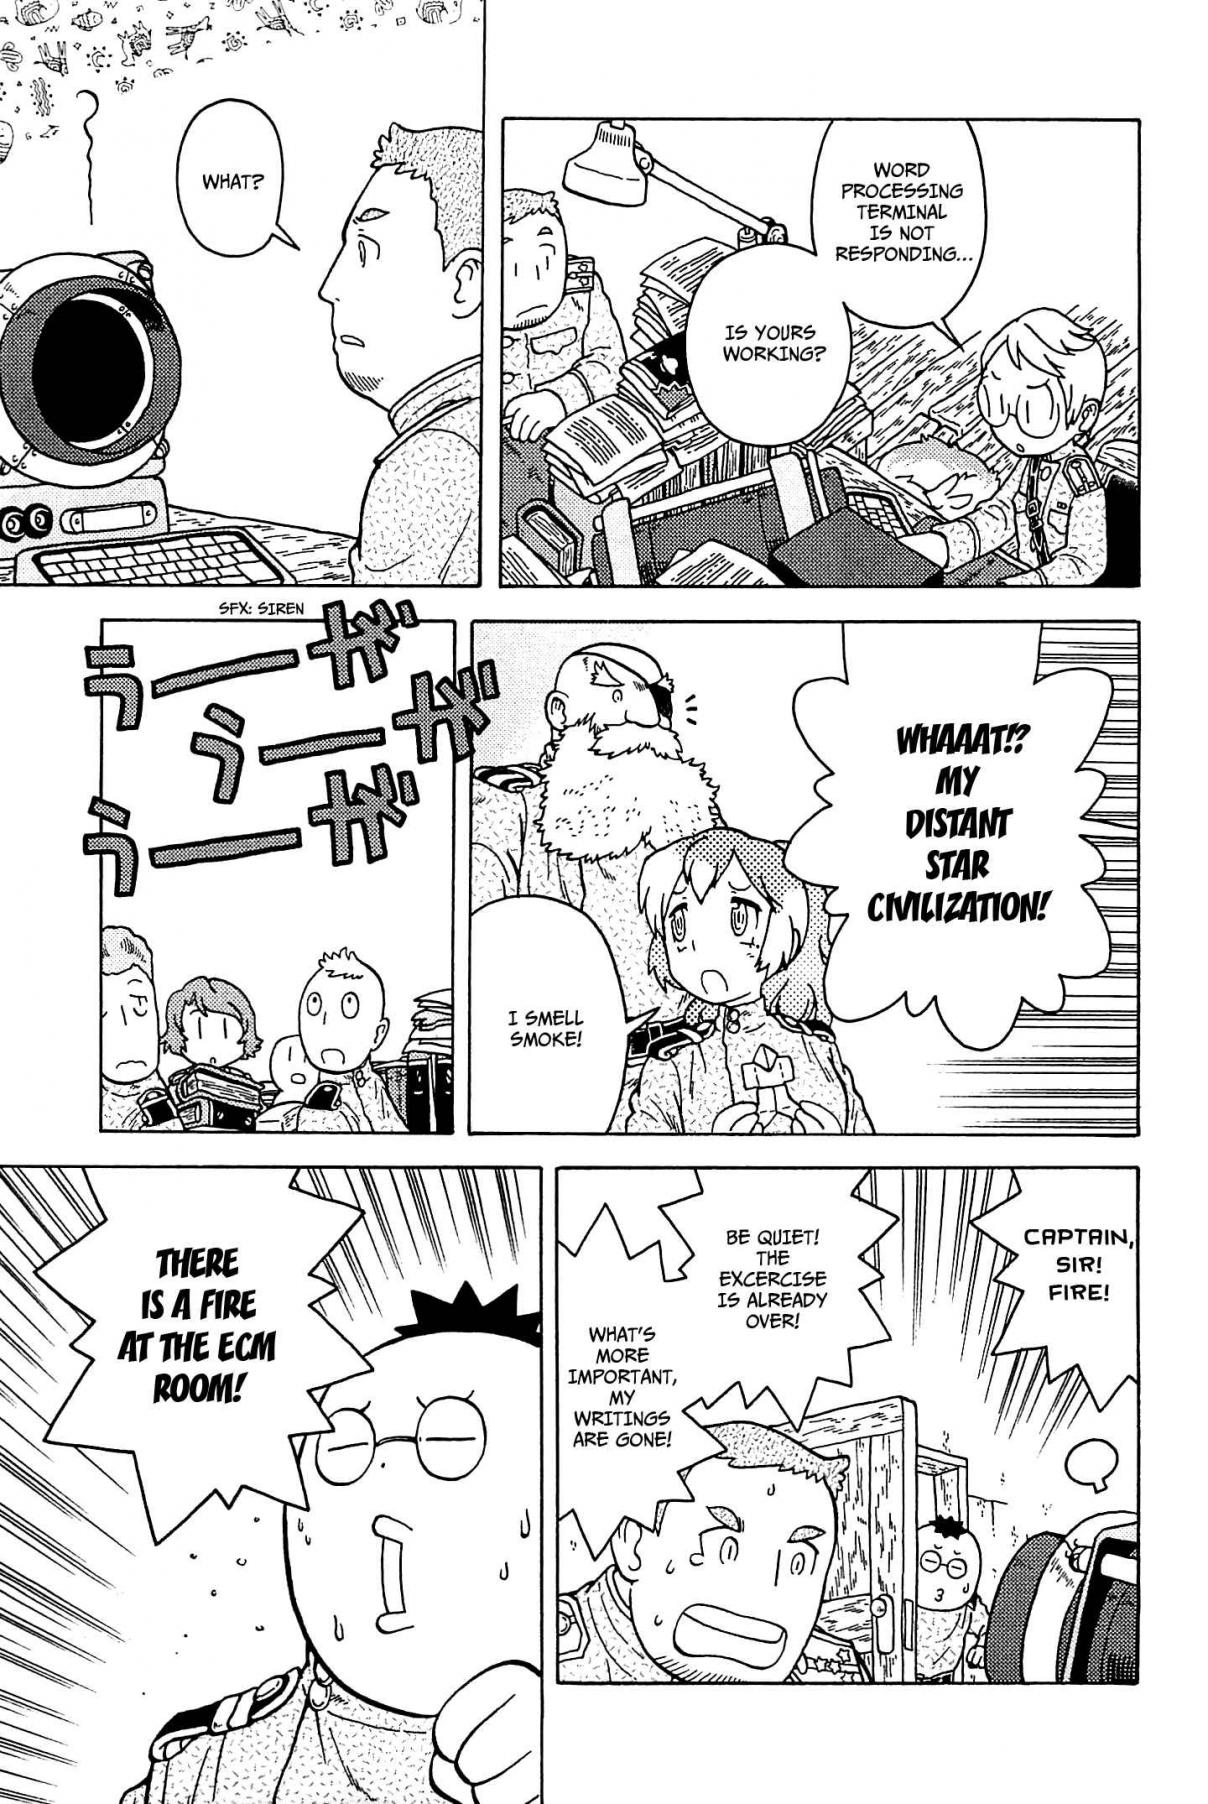 Guns and Stamps Vol. 4 Ch. 26 Shopping, Shopping!